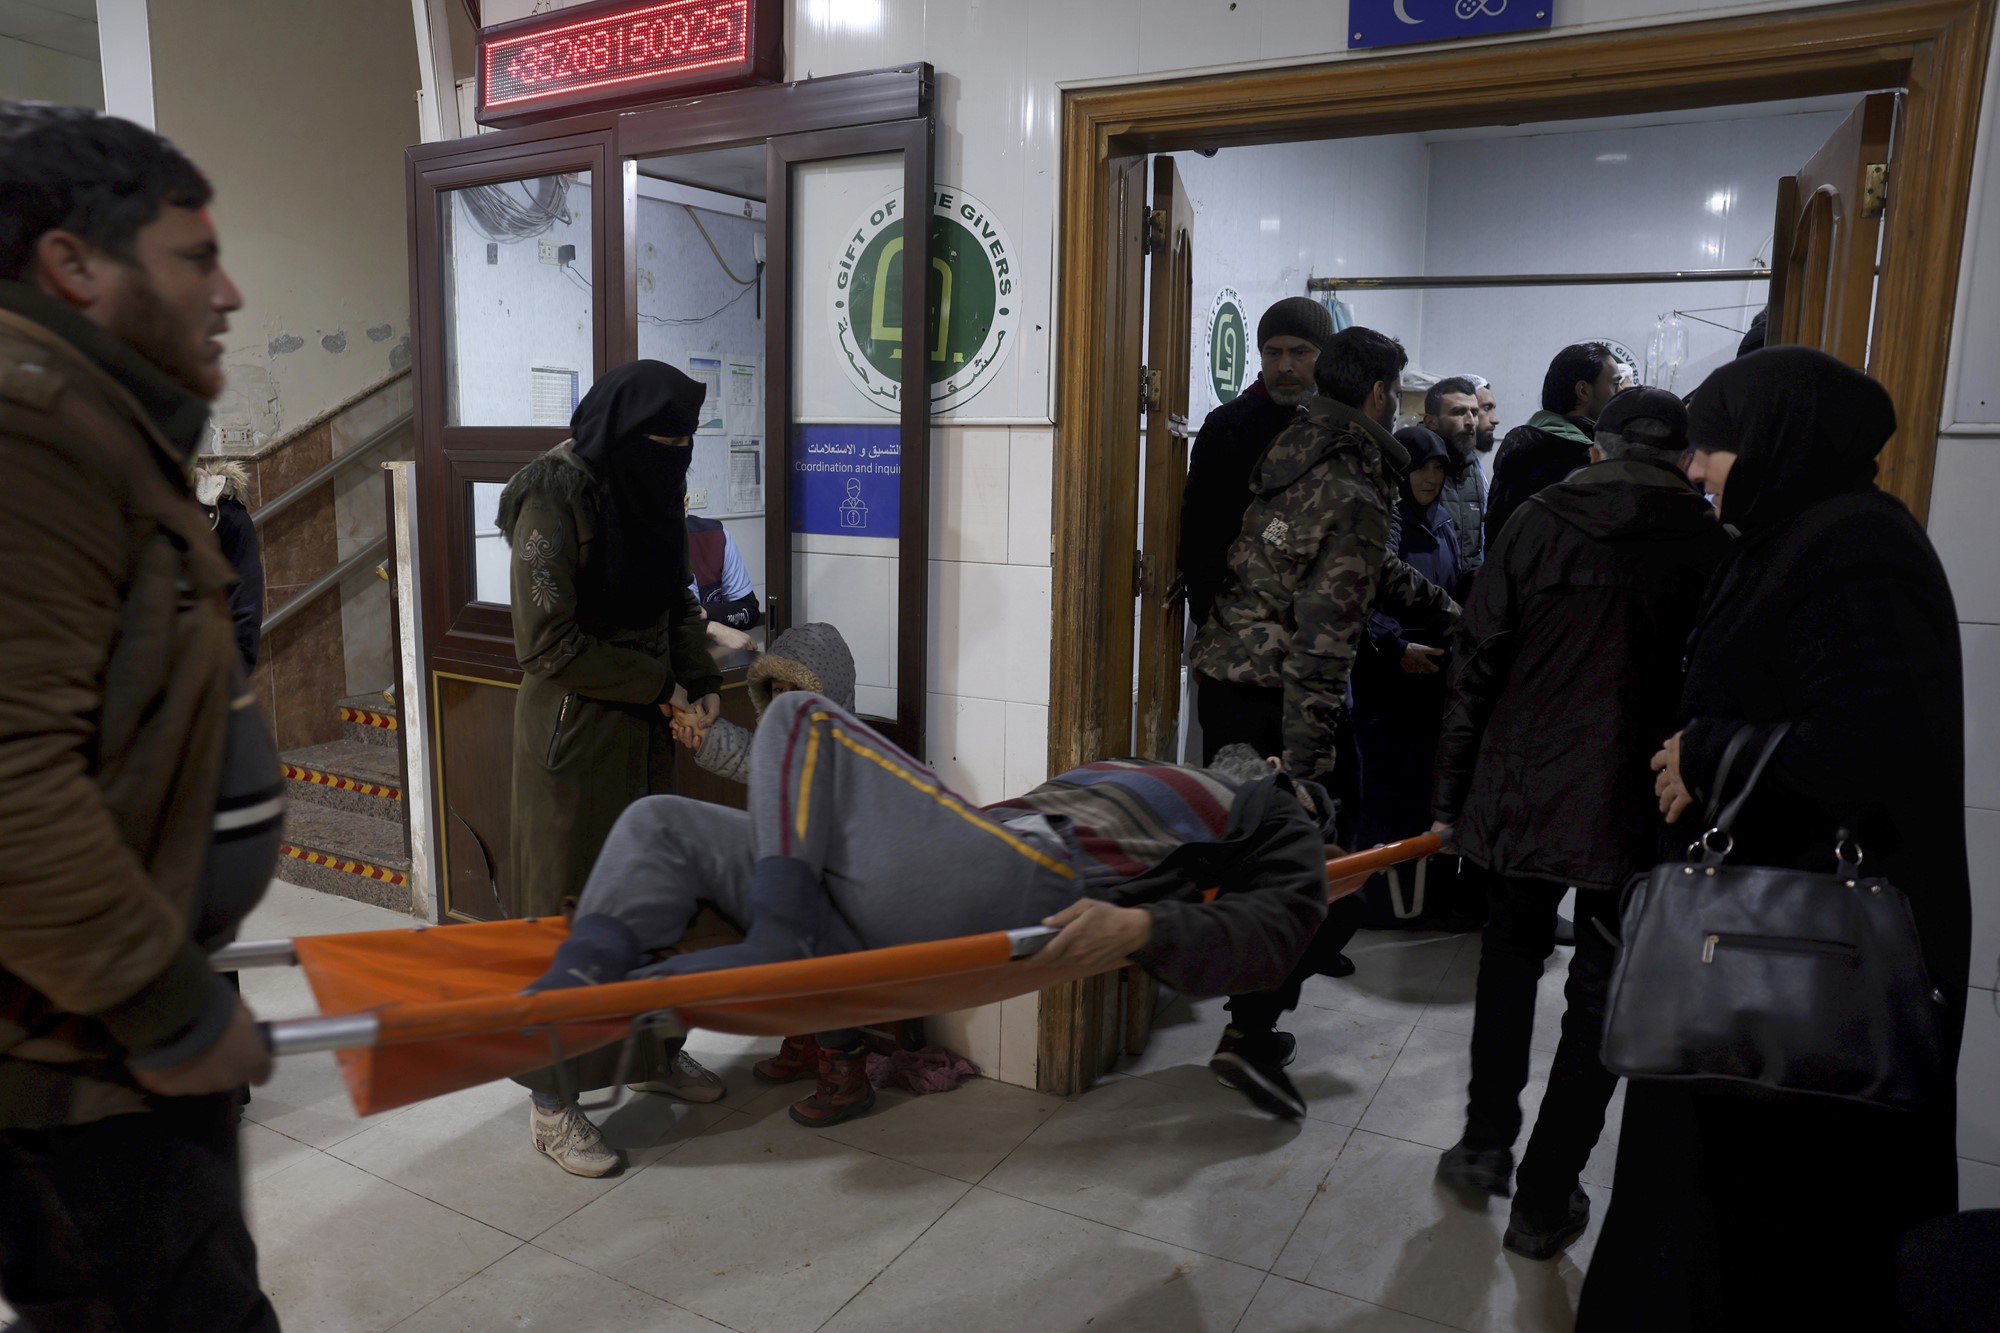 People carry a man injured in an earthquake into the al-Rahma Hospital in the town of Darkush, Idlib province, northern Syria.